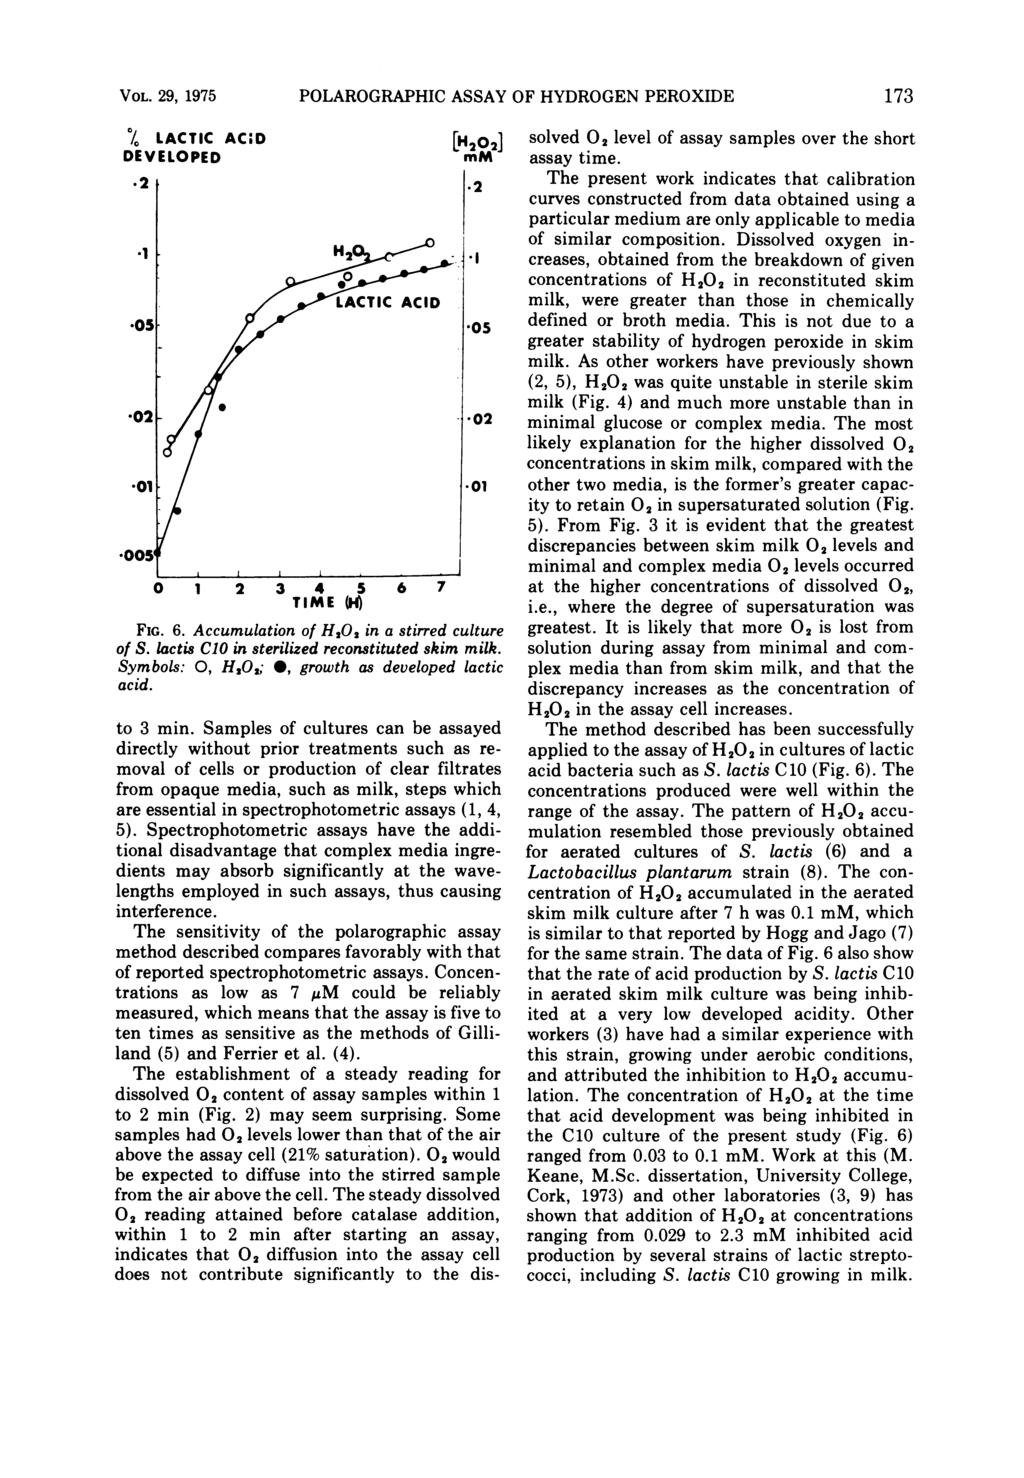 VOL. 29, 1975 % LACTIC AC;D DEVELOPED.2 j POLAROGRAPHIC ASSAY OF HYDROGEN PEROXIDE 3 4 5 TIME (H) FIG. 6. Accumulation of H202 in a stirred culture of S.